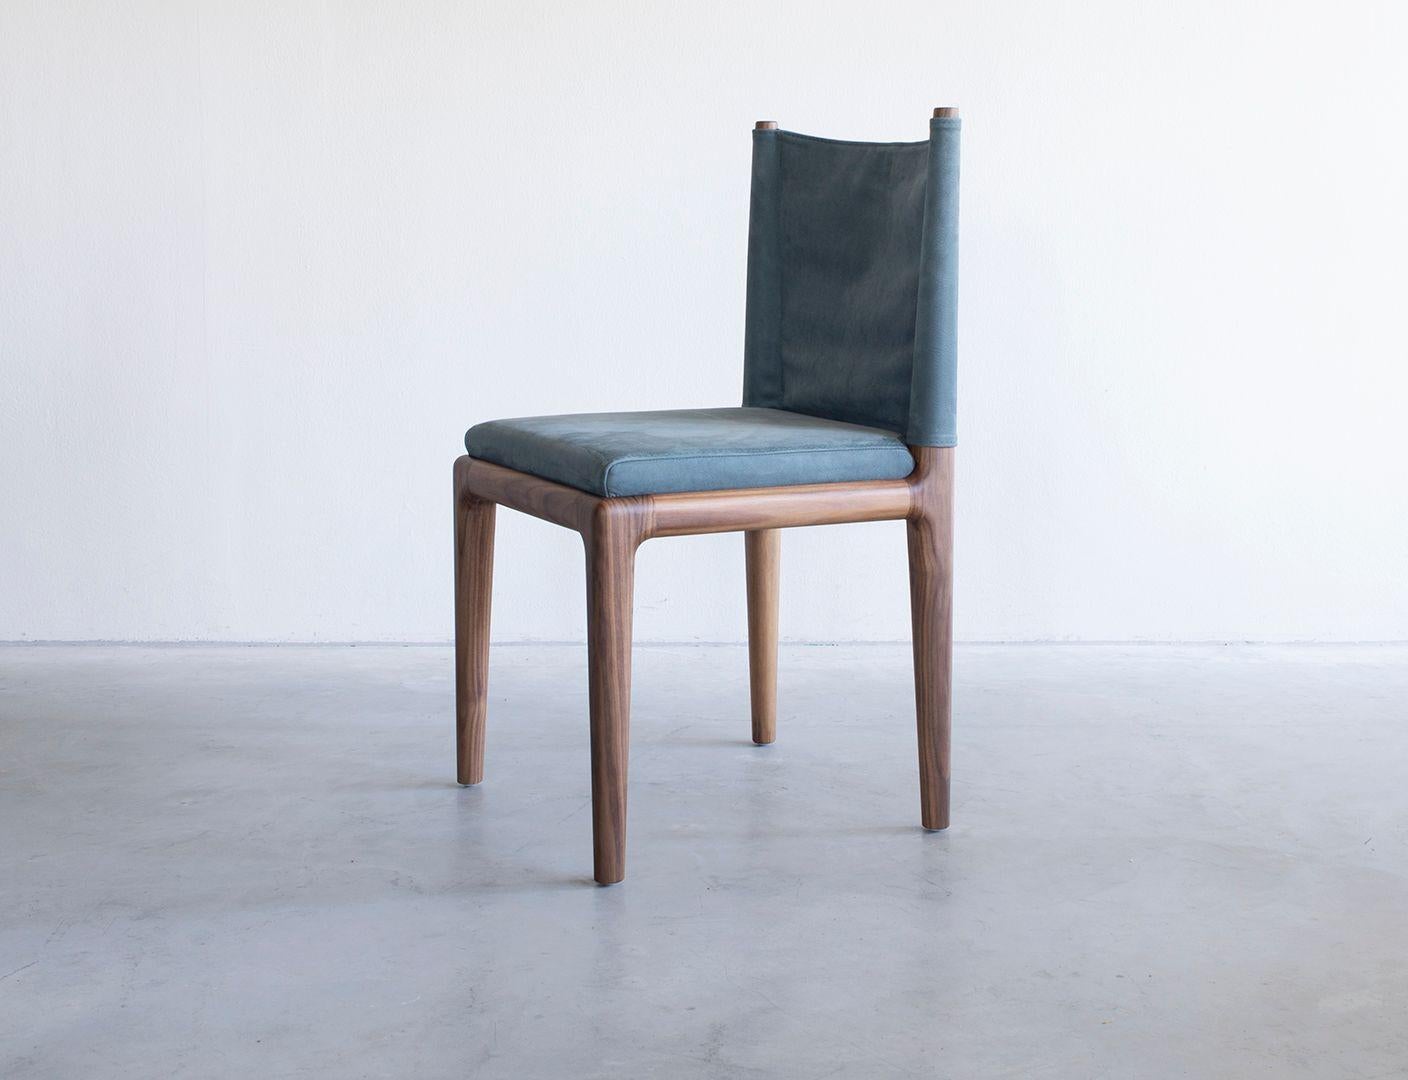 Abi chair large by Van Rossum
Dimensions: D47 x W47 x H86 cm
Materials: Walnut, leather.

The wood is available in all standard Van Rossum colors, or in a matching finish to customer’s own sample.
Choose from our leather colors, or send us your